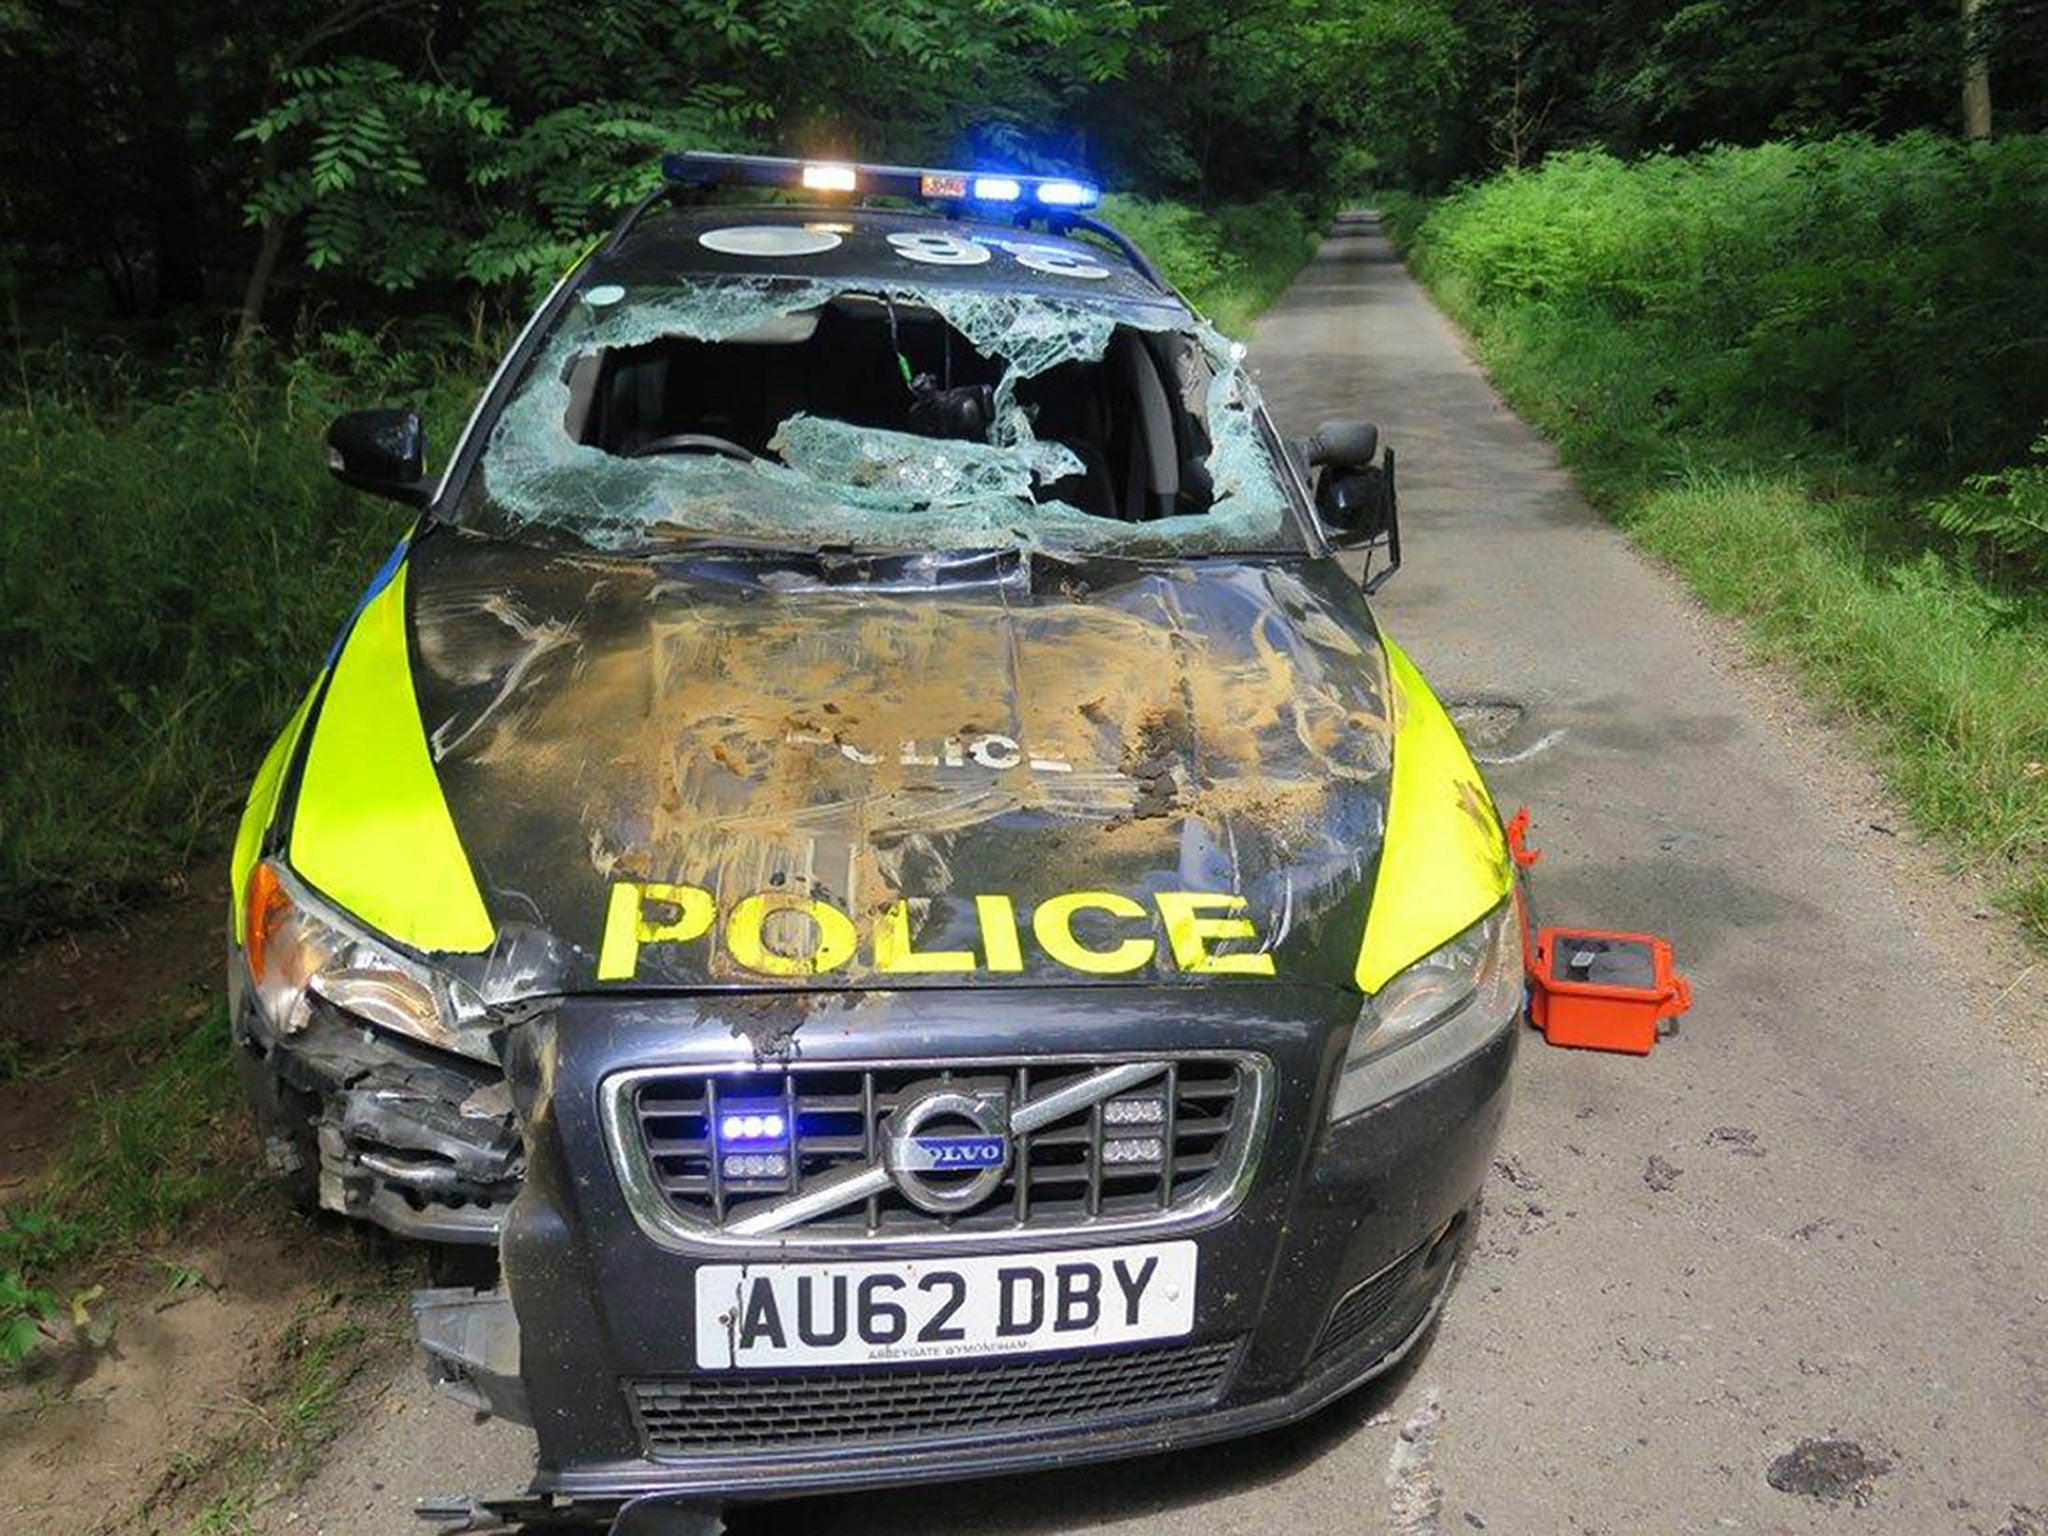 The police car after it was rammed